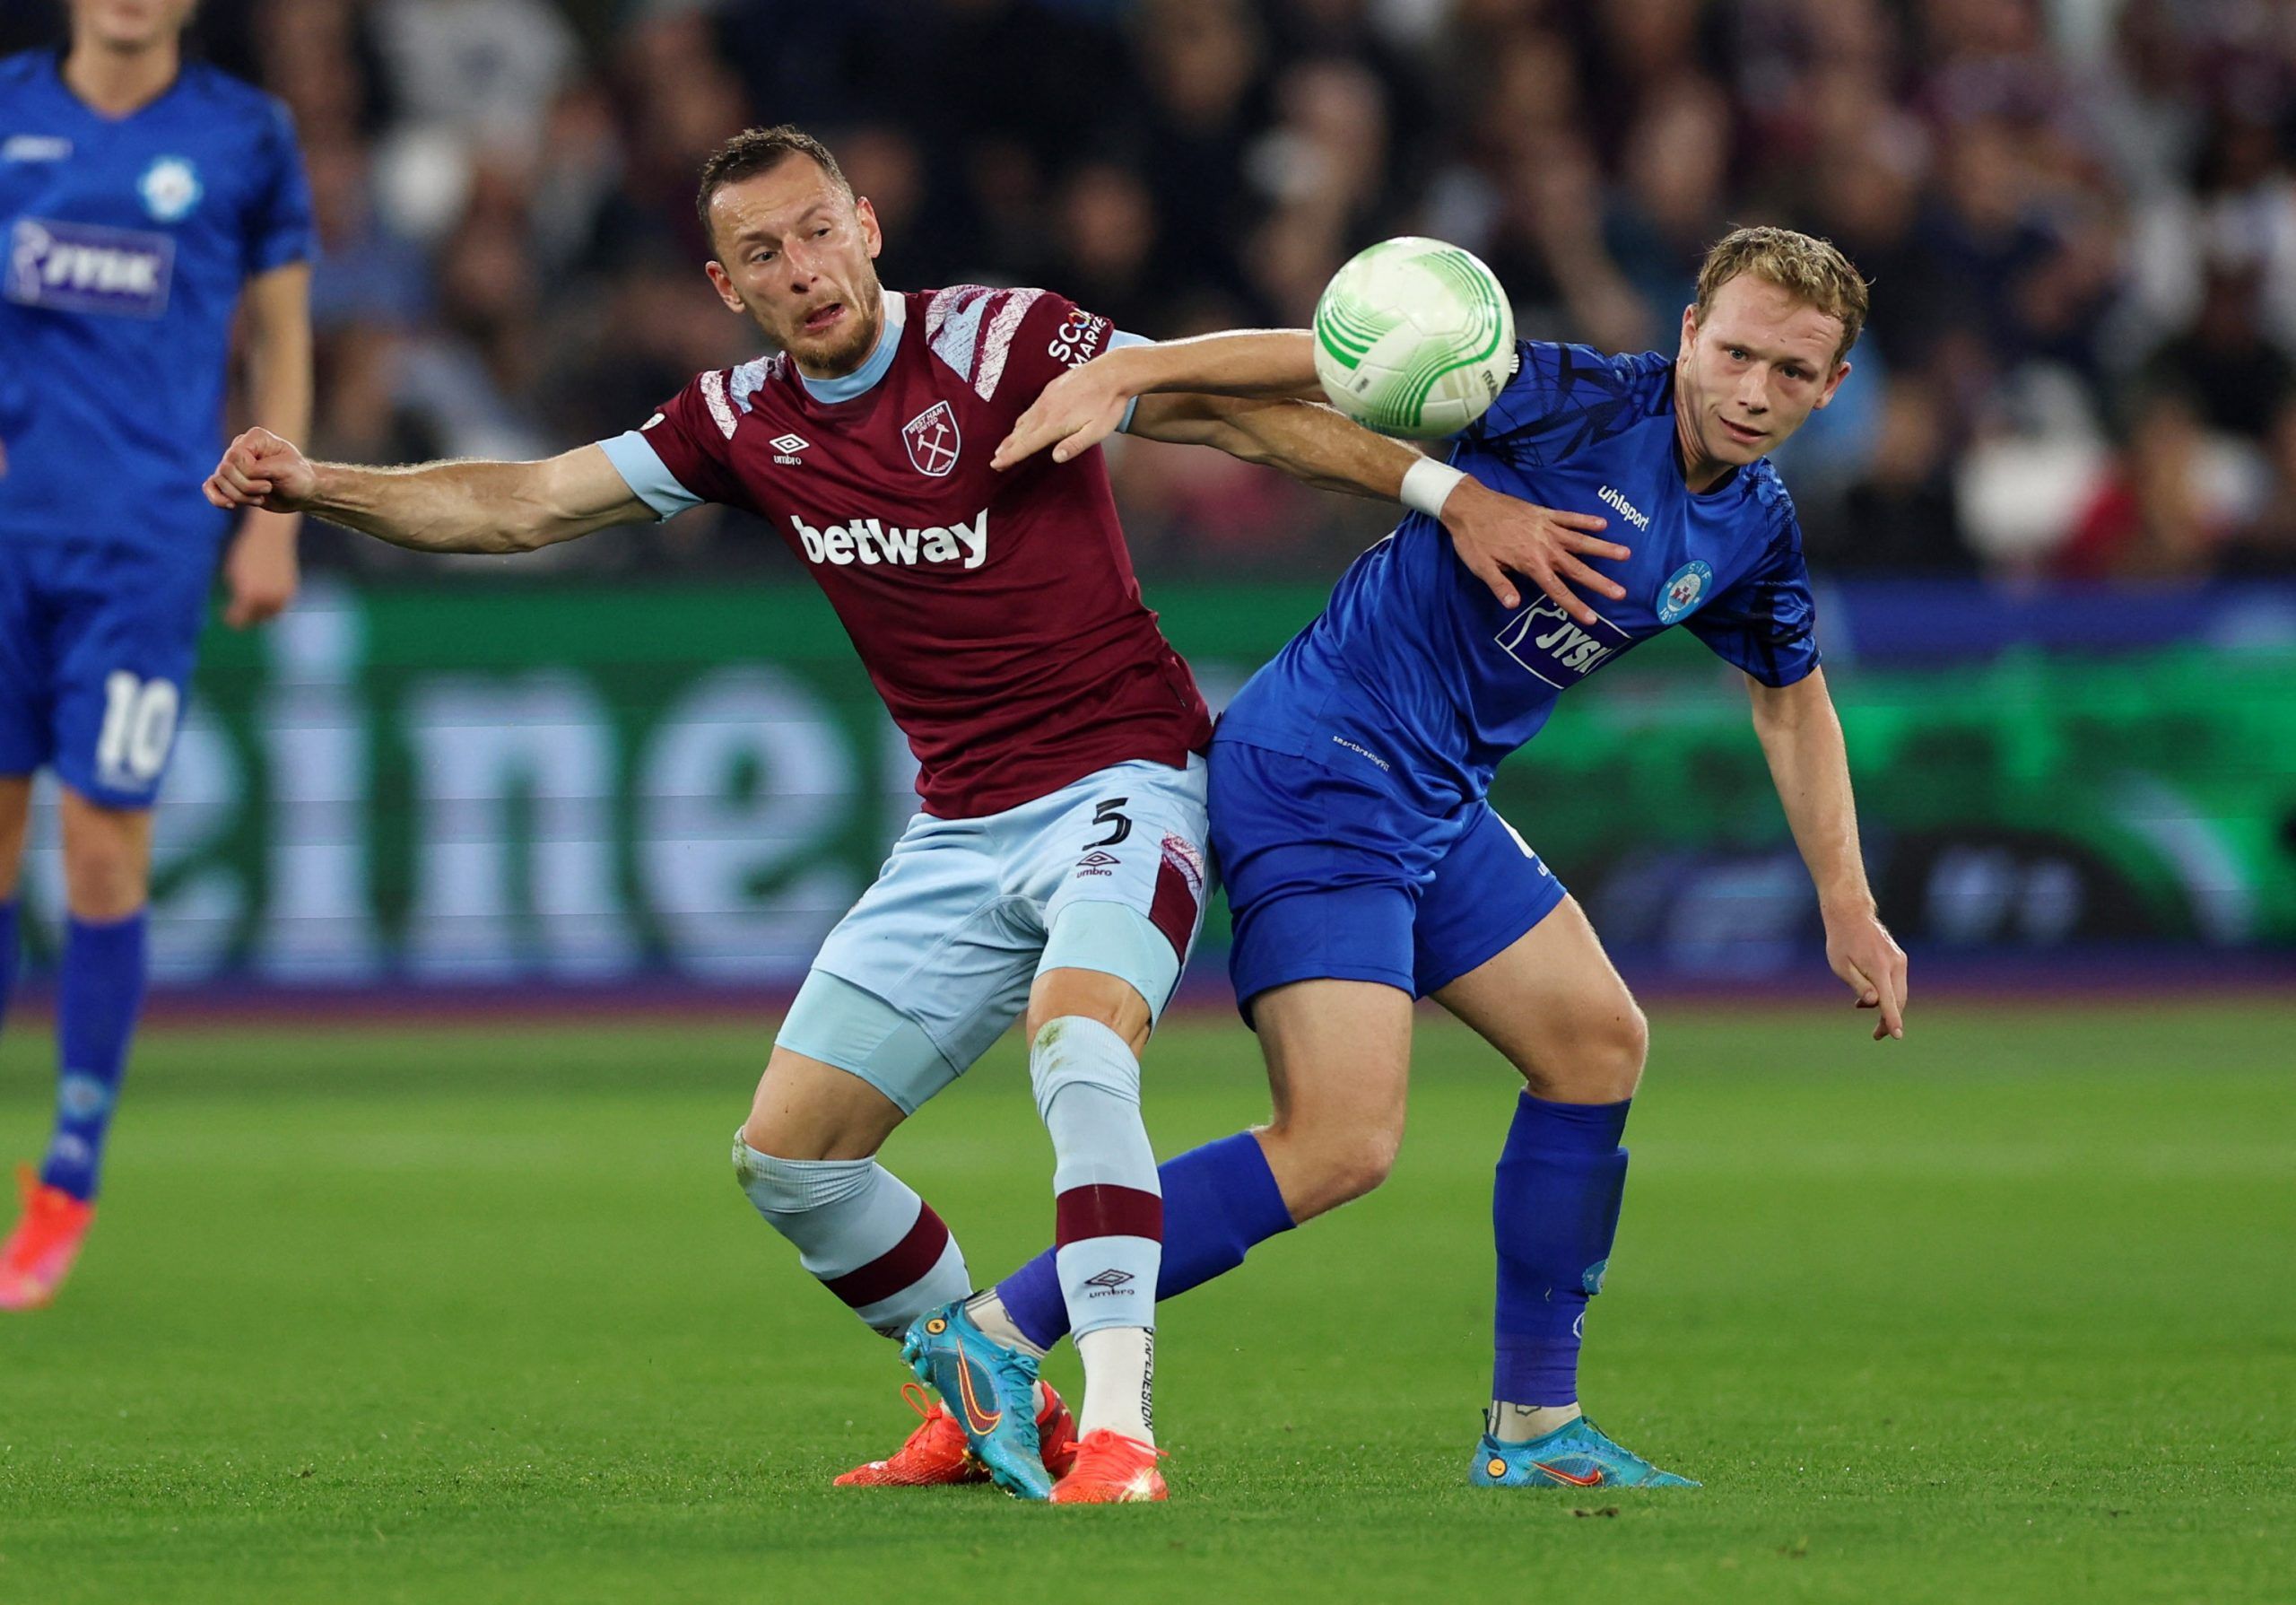 Soccer Football - Europa Conference League - Group B - West Ham United v Silkeborg - London Stadium, London, Britain - October 27, 2022 West Ham United's Vladimir Coufal in action with Silkeborg's Anders Klynge Action Images via Reuters/Matthew Childs